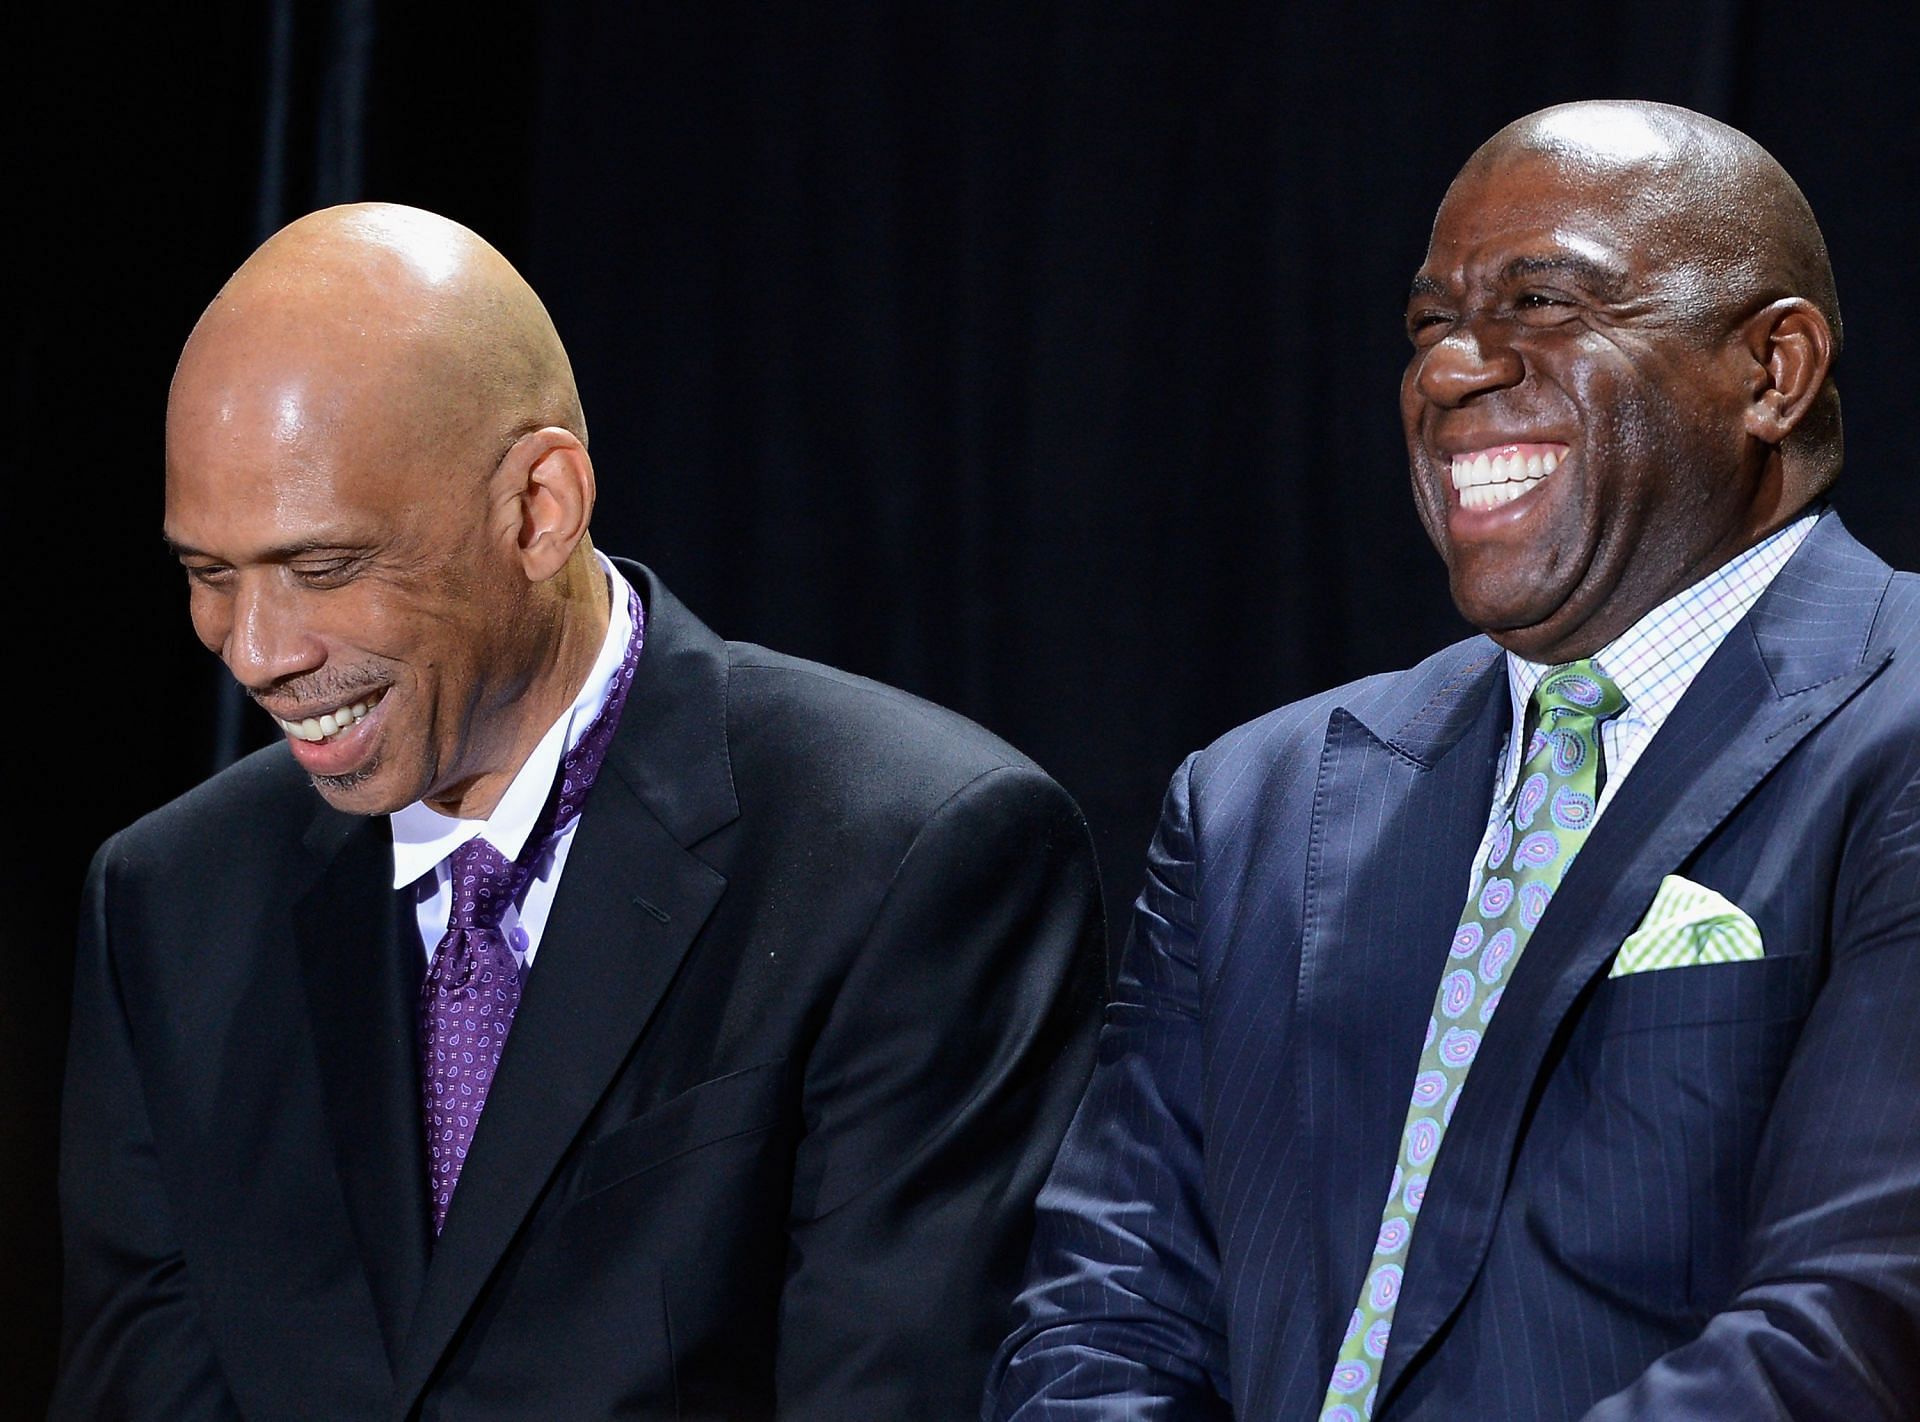 Got Cheated in 1988!”: 4X NBA Champion Openly Accuses Kareem Abdul-Jabbar  and Magic Johnson's Lakers of Stealing a Championship - EssentiallySports